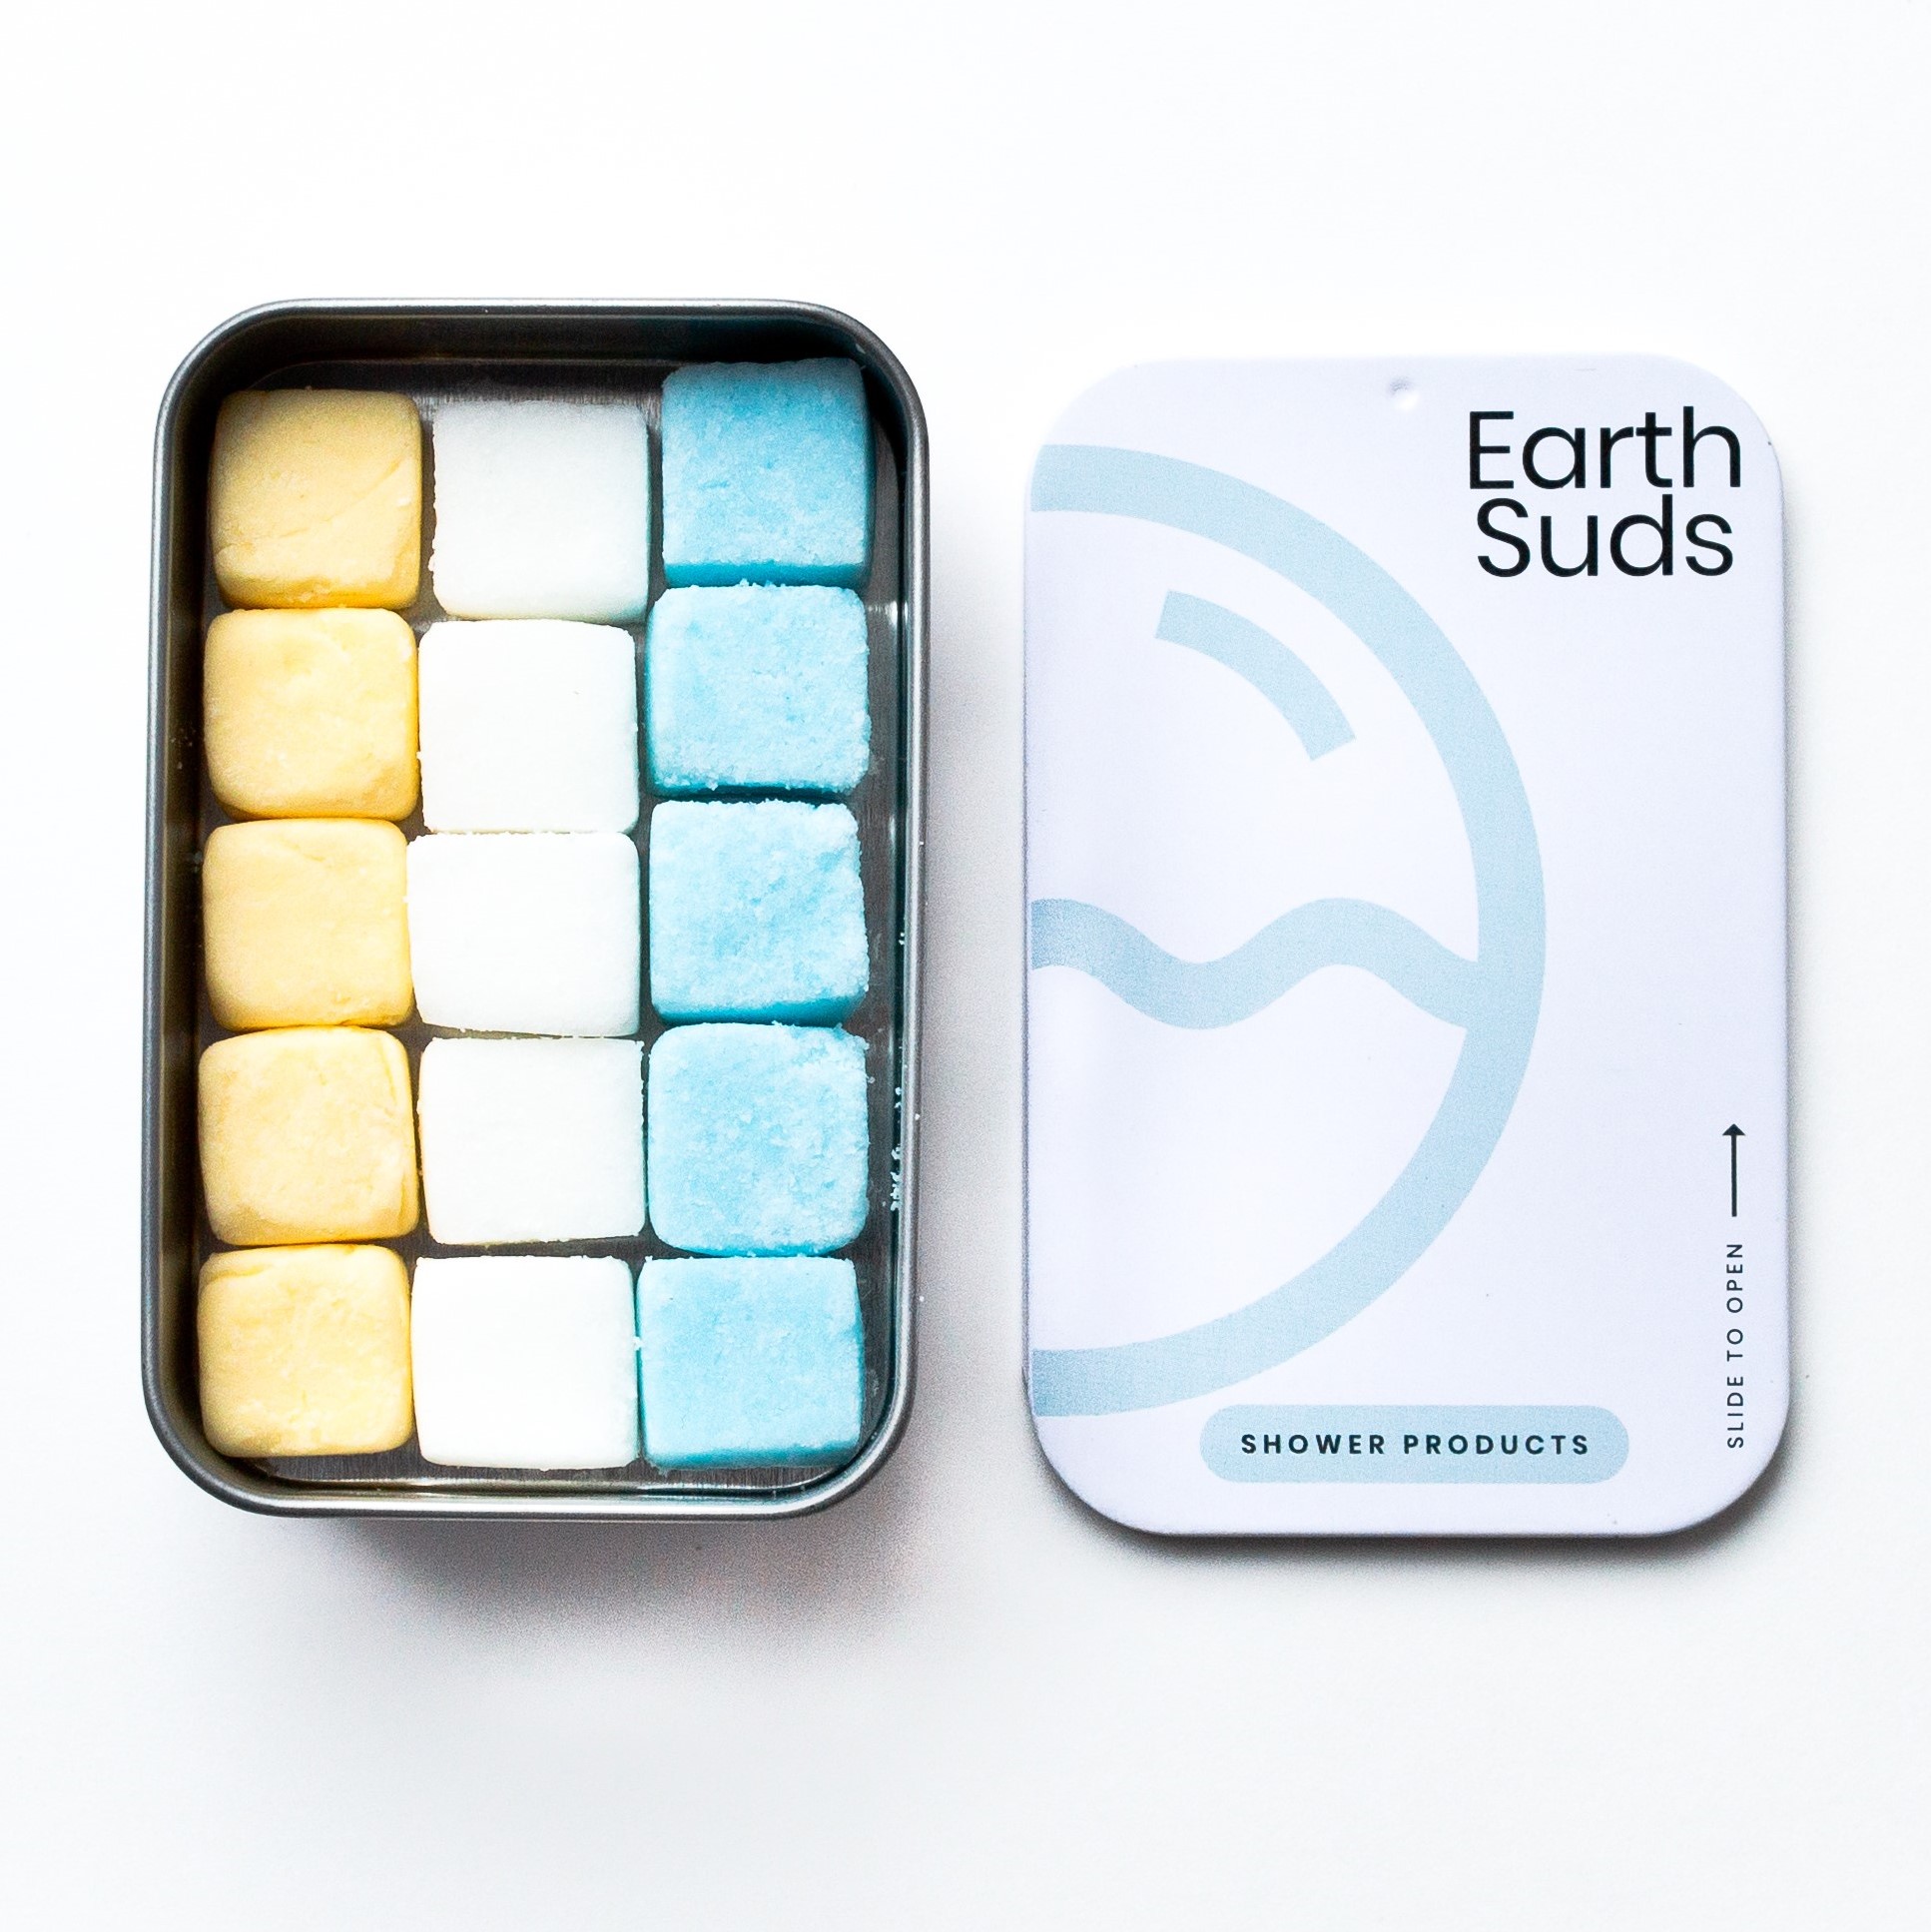 EarthSuds signs deal with new manufacturing facility, expands sales to Amazon